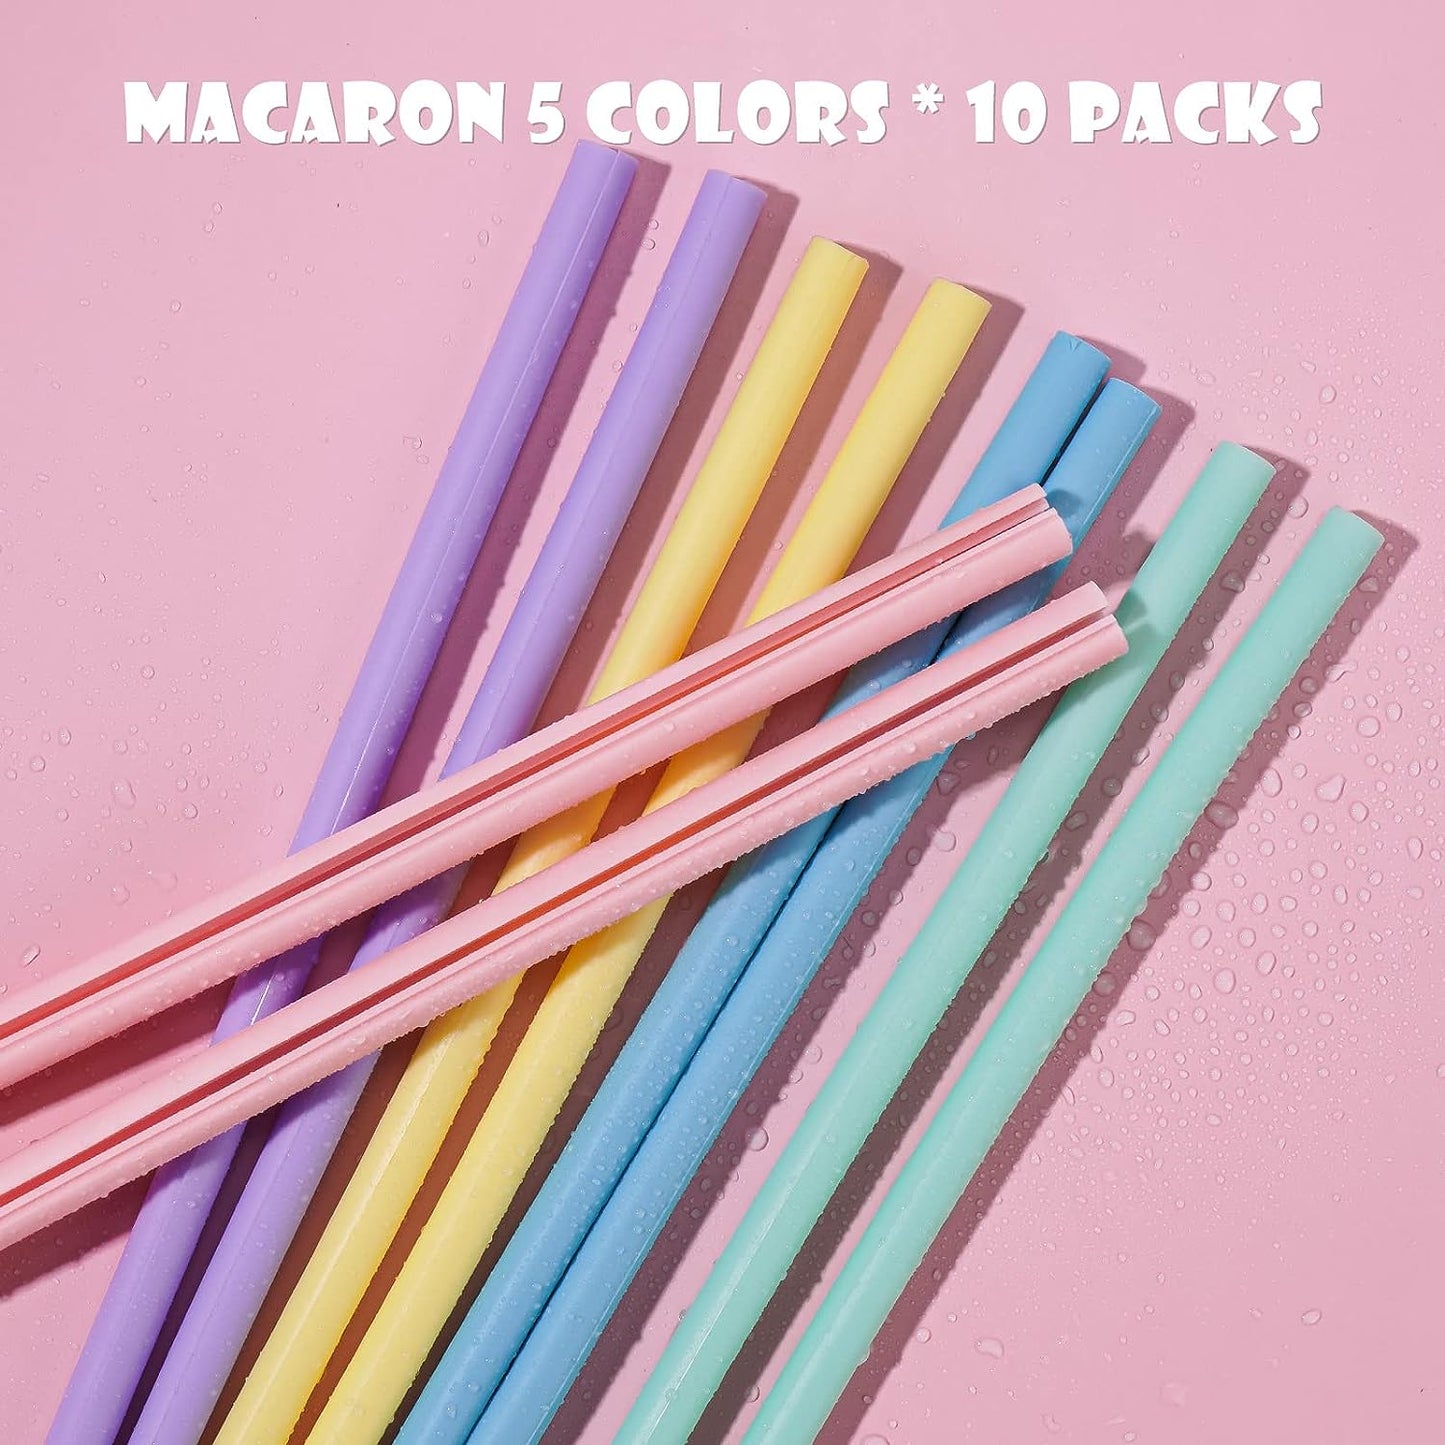 10-Pack Reusable Silicone Straws Openable Design Easy to Clean, Premium Food Grade Snap Straws BPA-Free Hot & Cold Compatible Drinking Straws Flexible Portable No Brush Needed (5 Macron Colors)